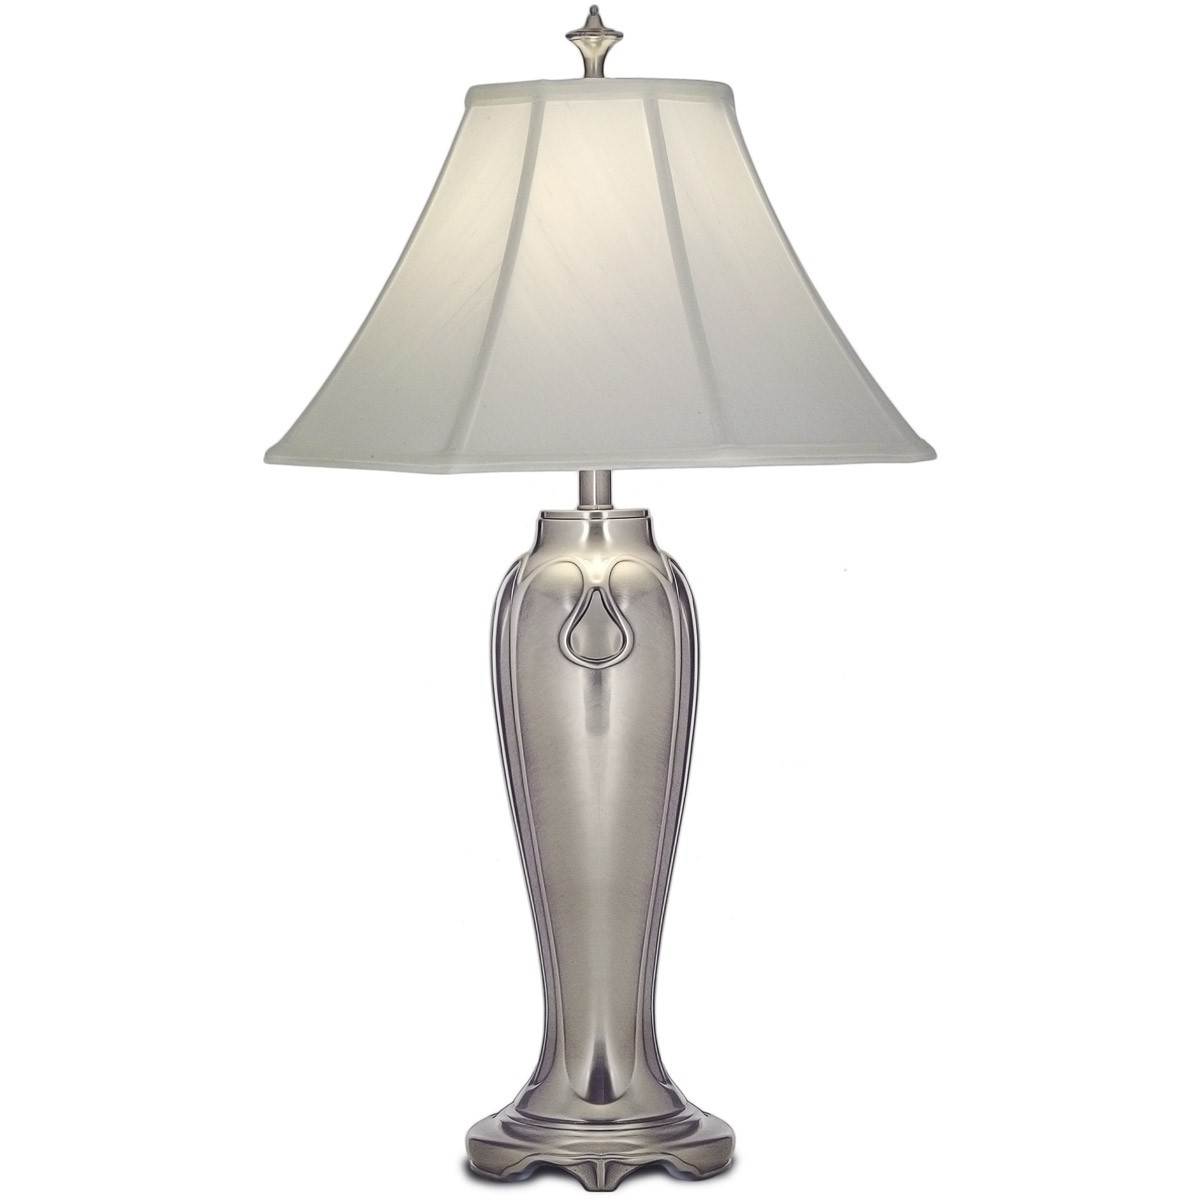 Stiffel TL-N7346-AN One Light Table Lamp, Antique Nickel Finish with Off White Silk Shade